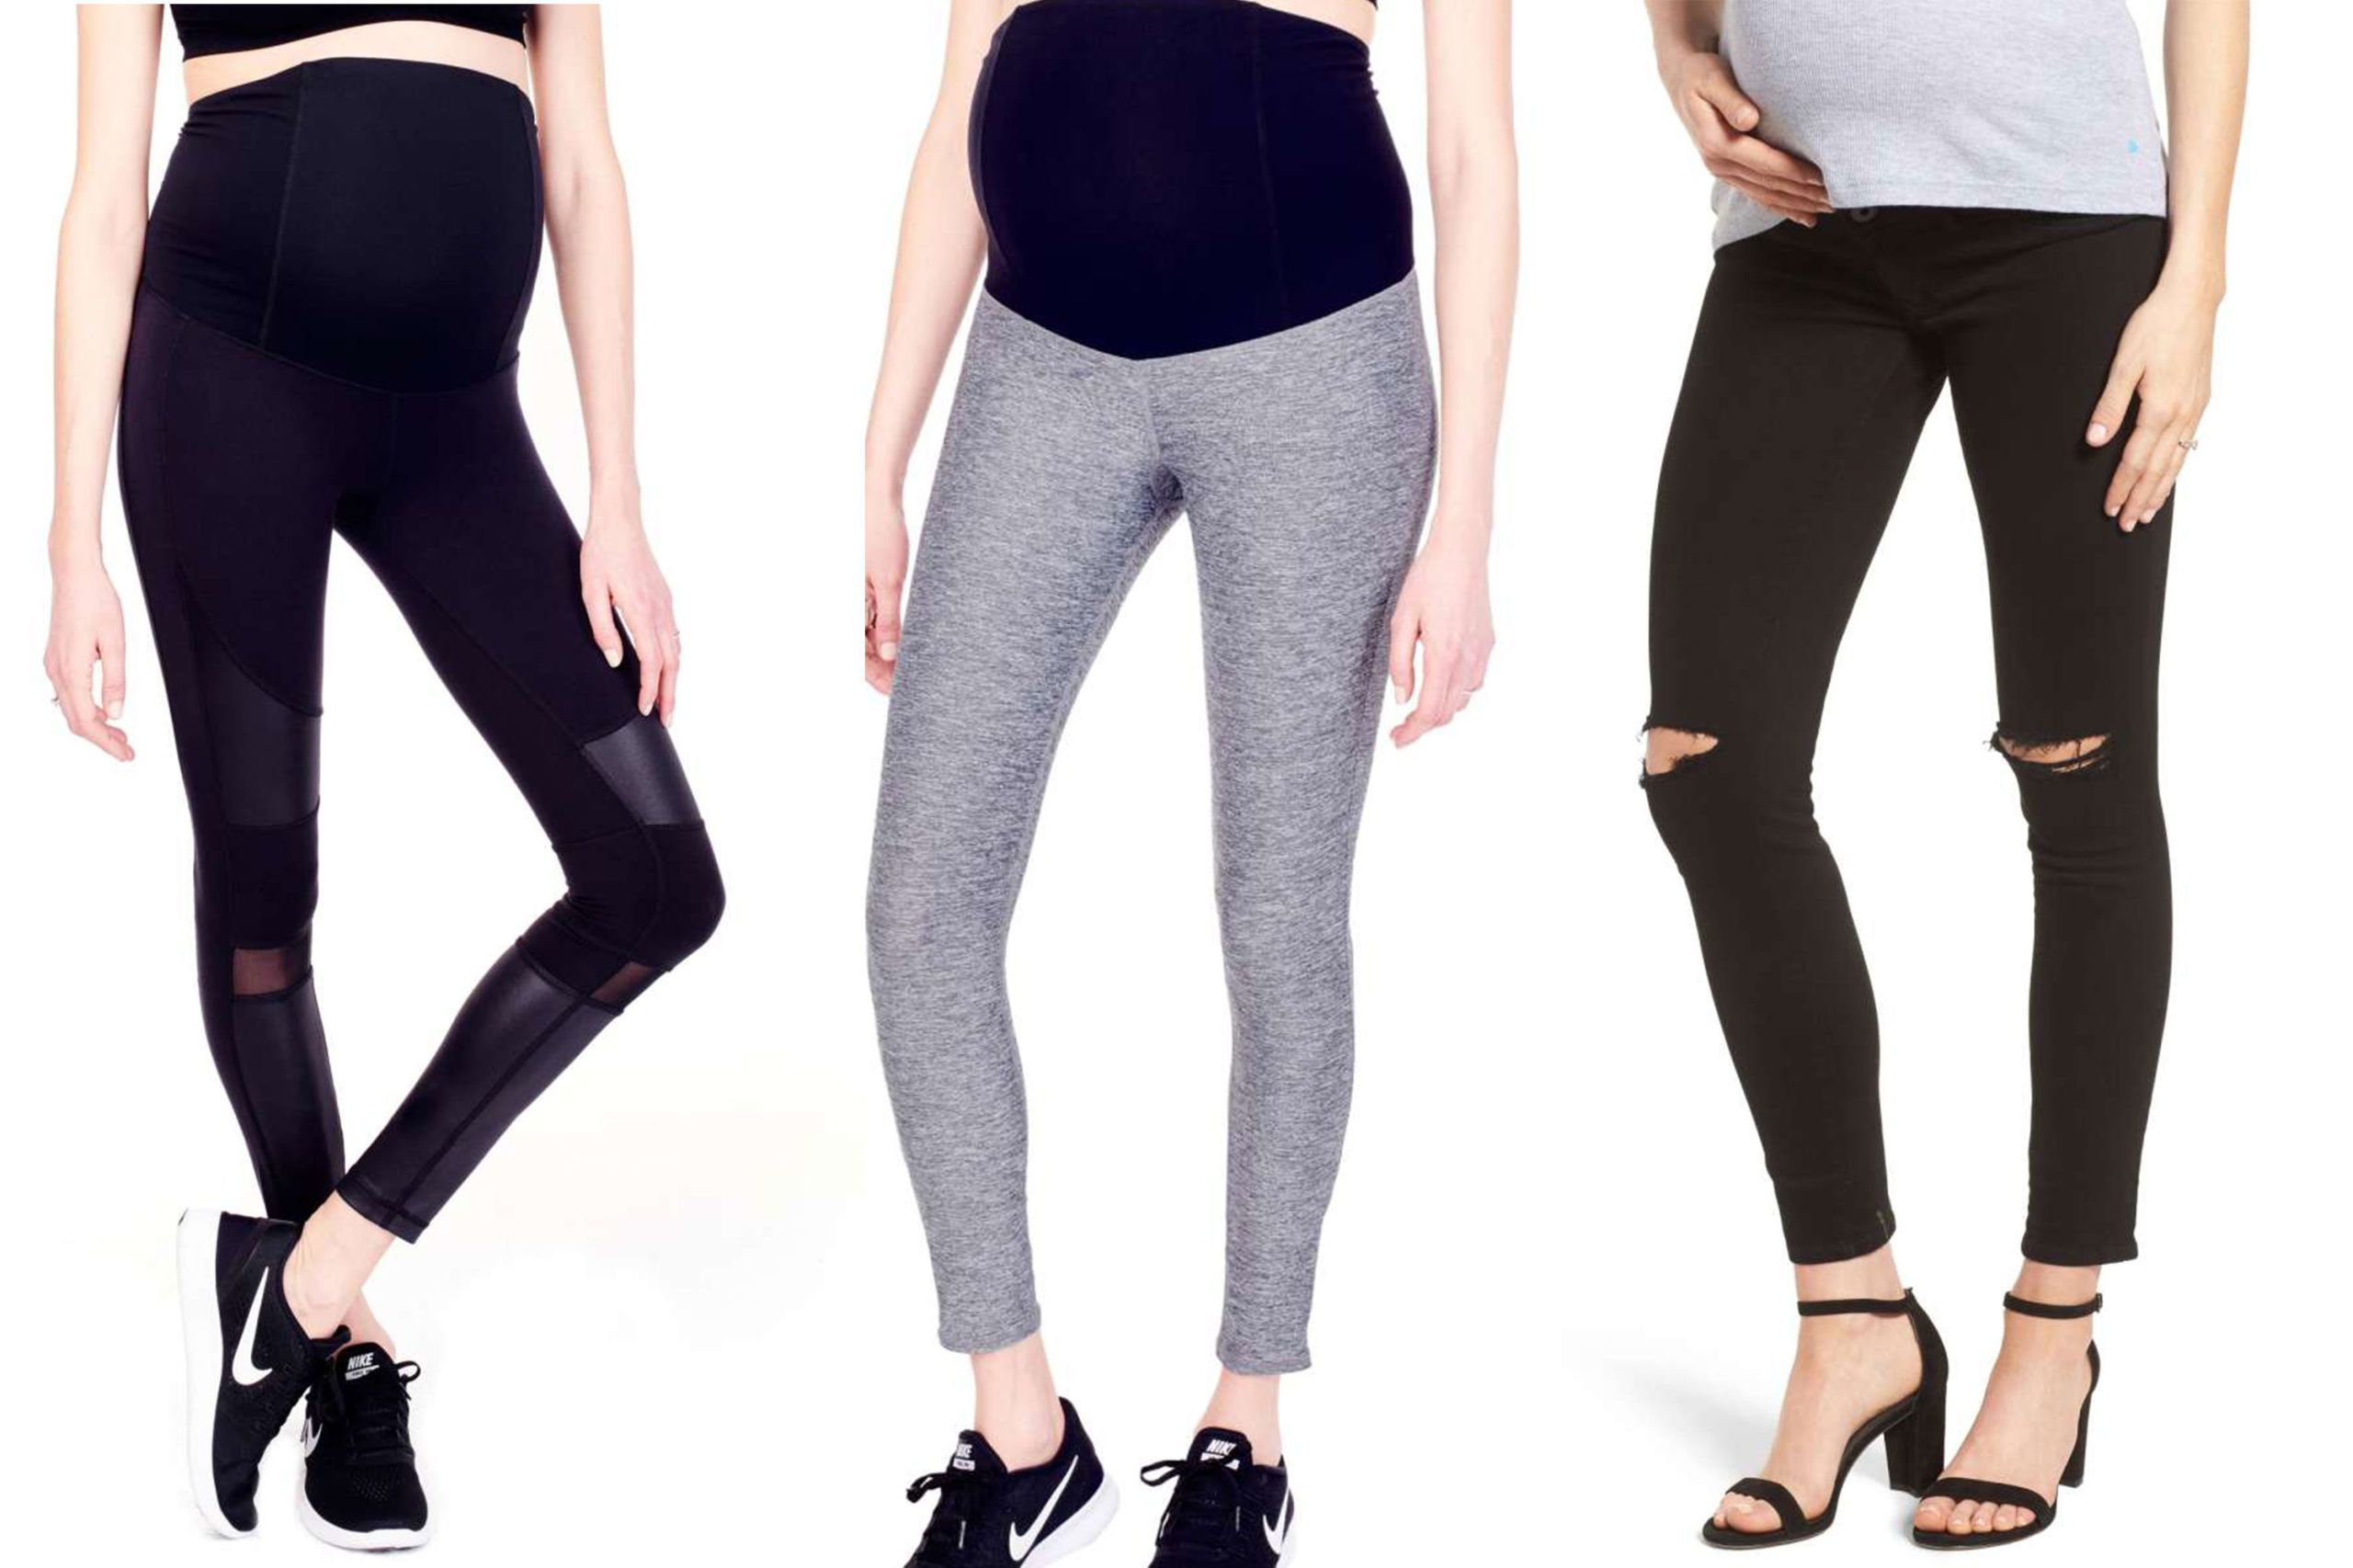 The Mom Store Pack Of 2 Solid Comfy Maternity Track Pants Black & Grey  Online in India, Buy at Best Price from Firstcry.com - 15661026